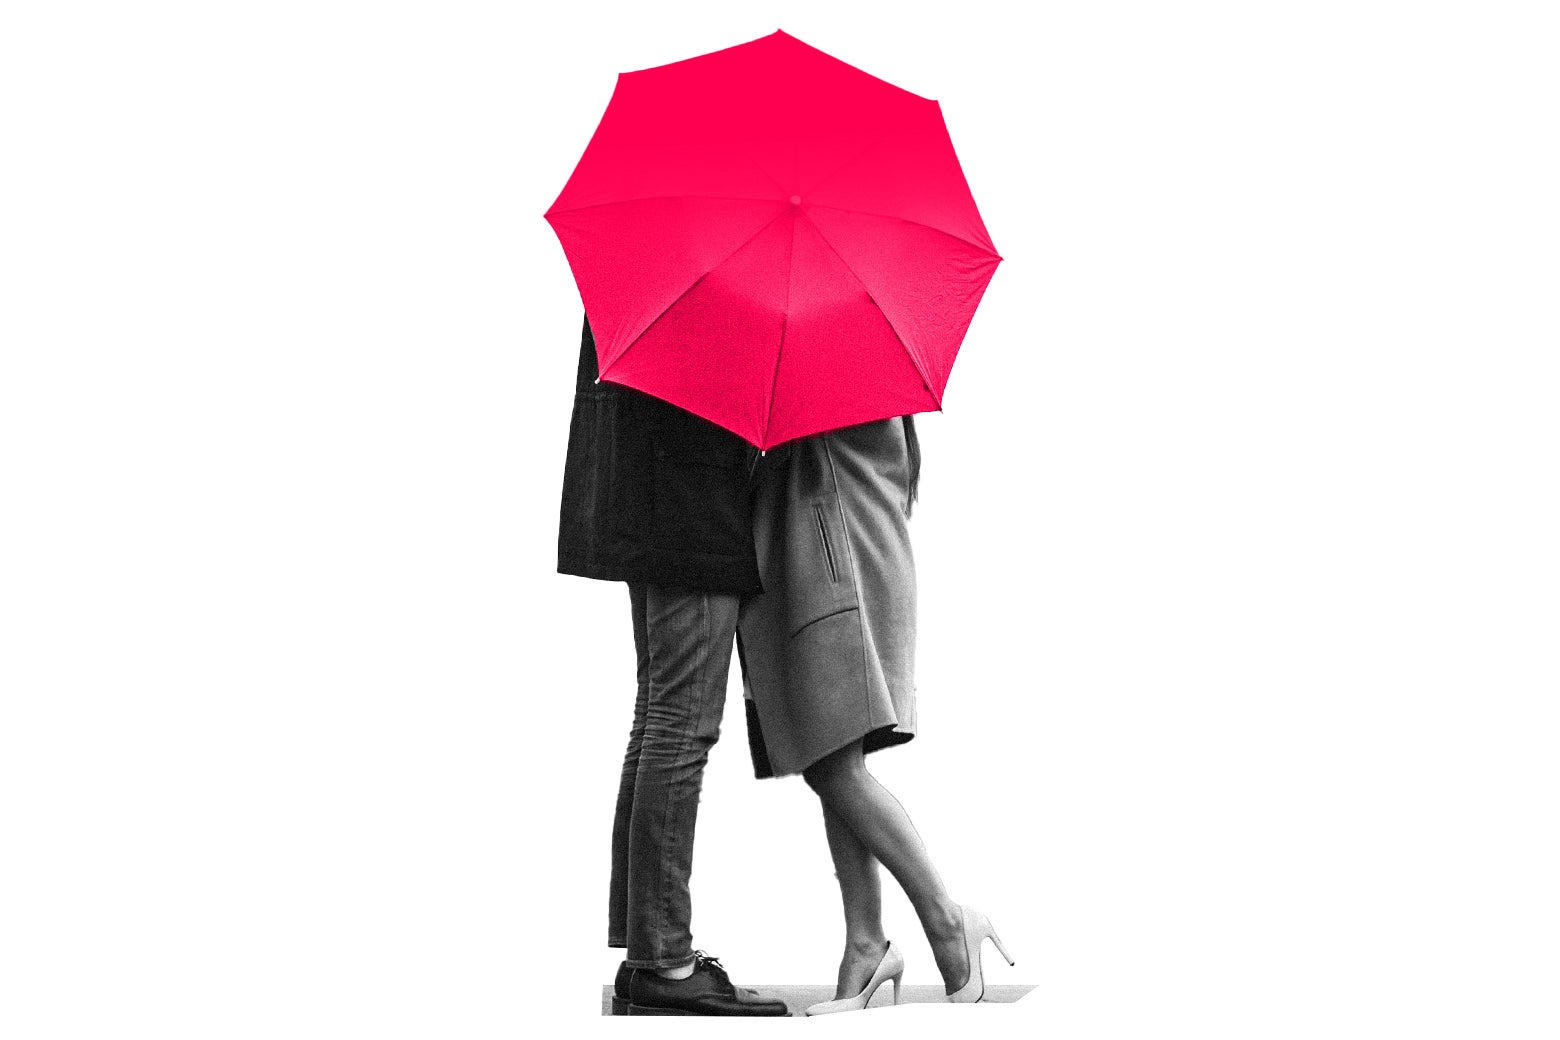 Two people kiss behind an umbrella.